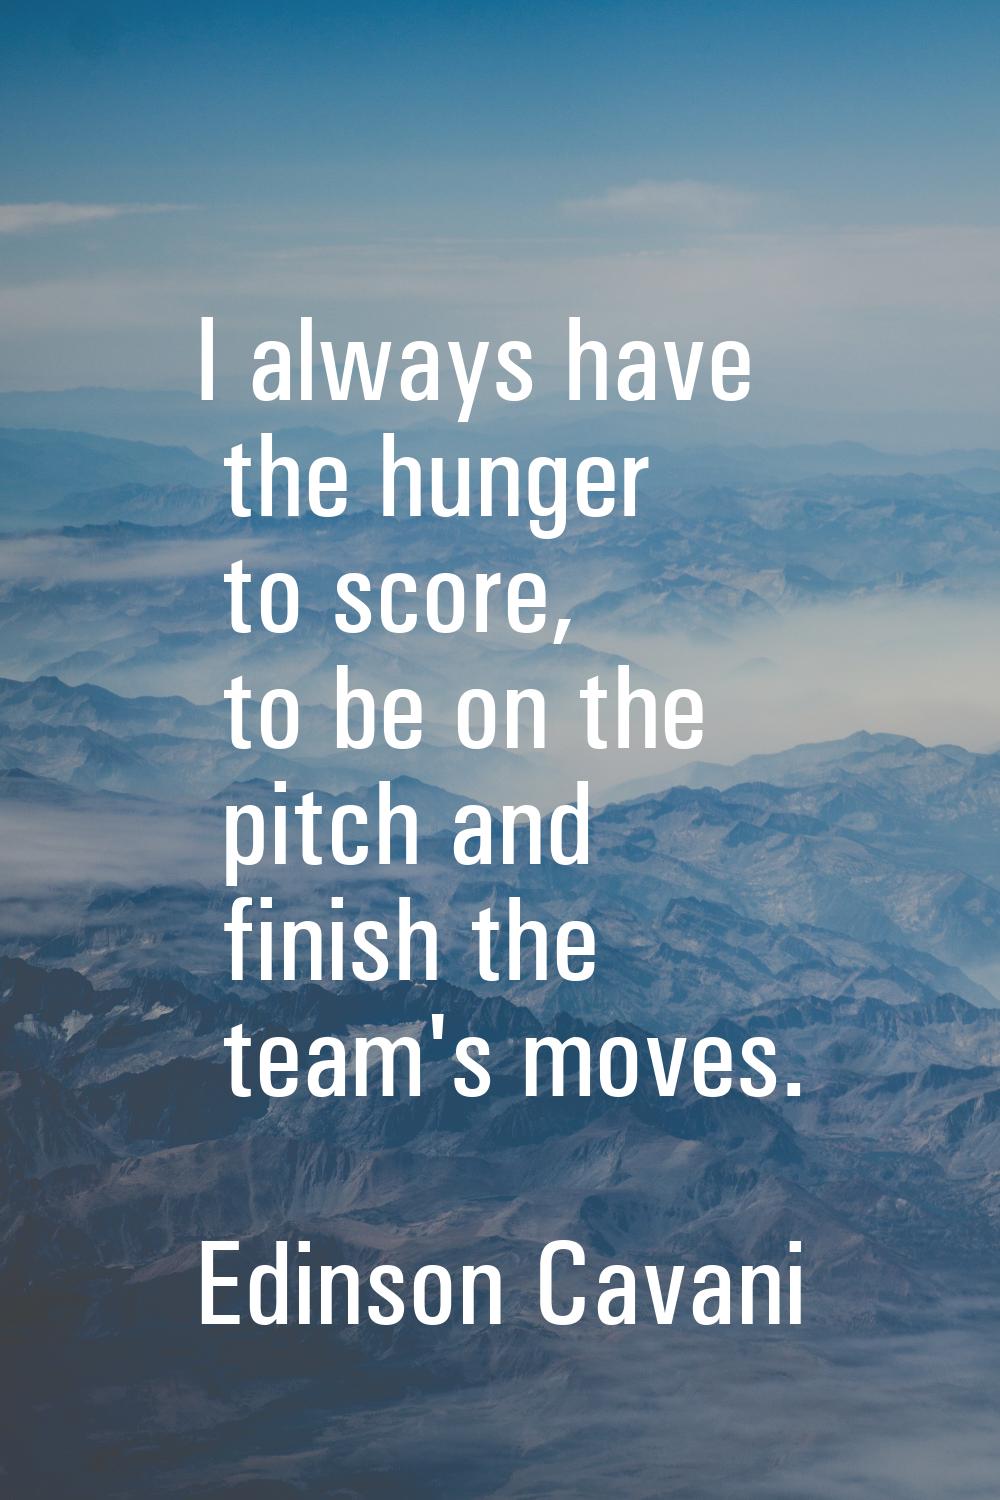 I always have the hunger to score, to be on the pitch and finish the team's moves.